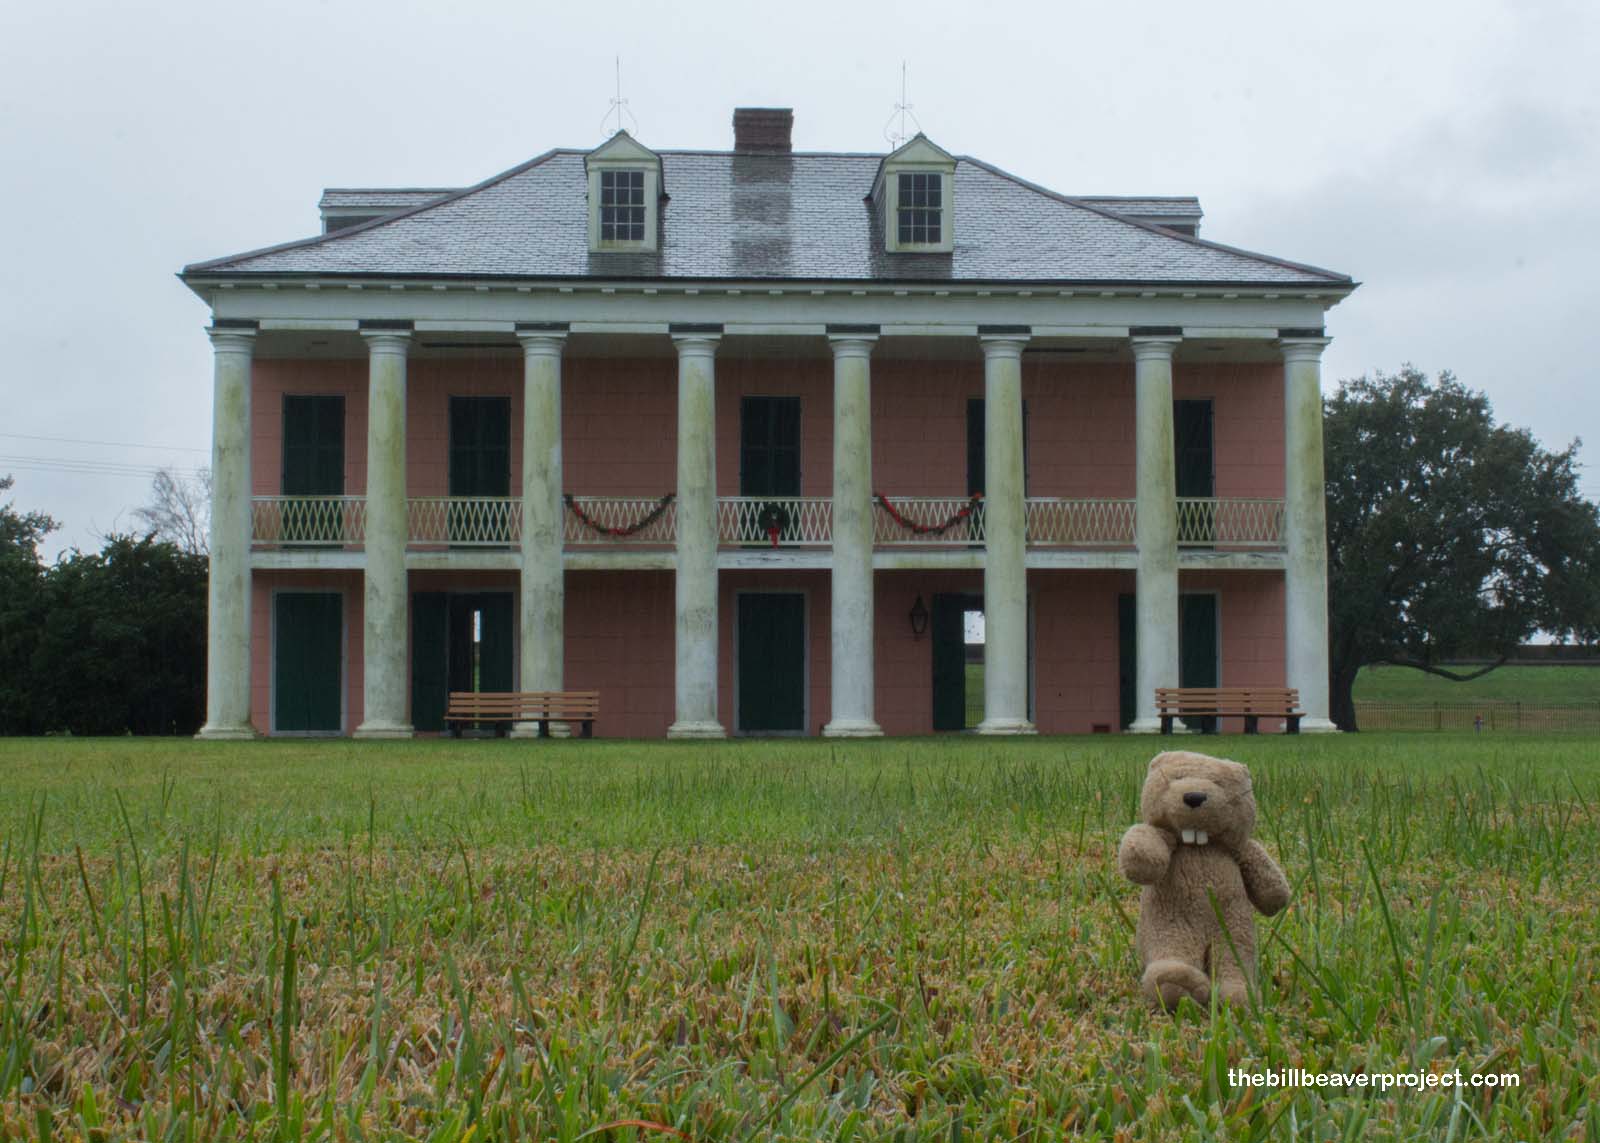 The Malus-Beauregard House on the site of the Chalmette Battlefield!